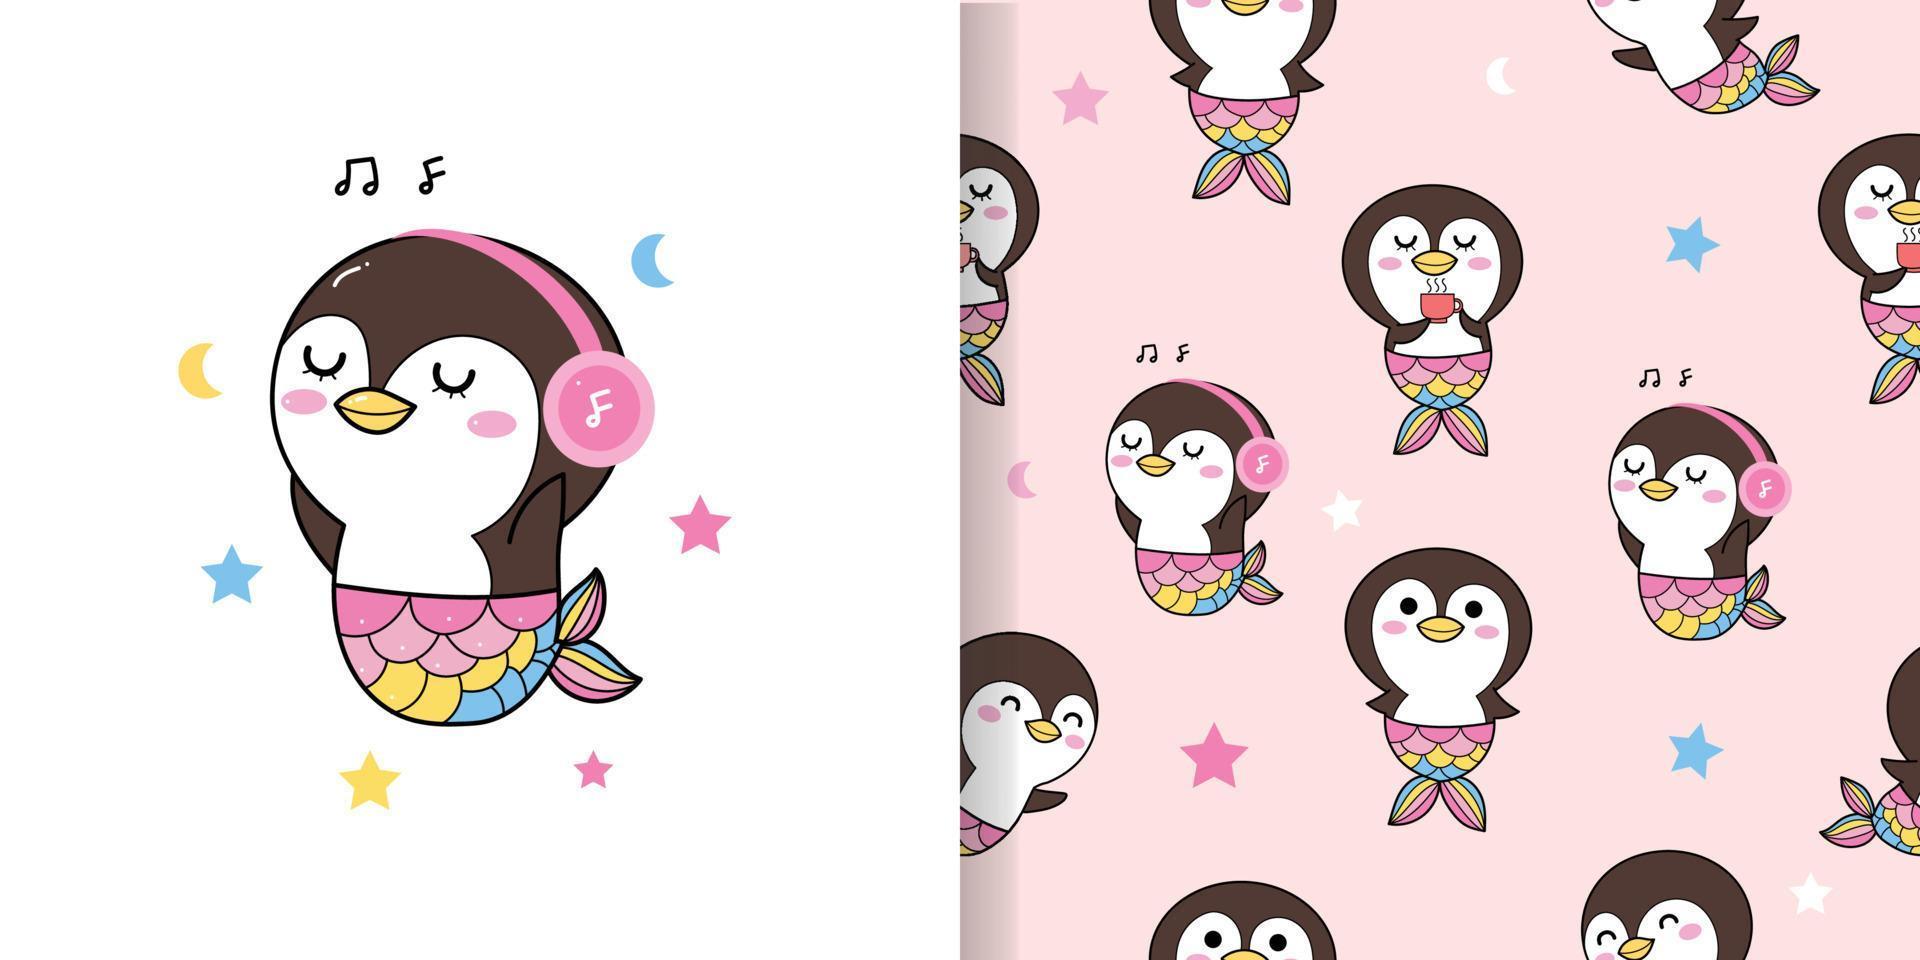 https://static.vecteezy.com/system/resources/previews/003/824/837/non_2x/cute-penguin-mermaid-cartoon-pattern-seamless-on-pink-background-with-relax-time-drinking-coffee-listening-music-and-happy-vector.jpg